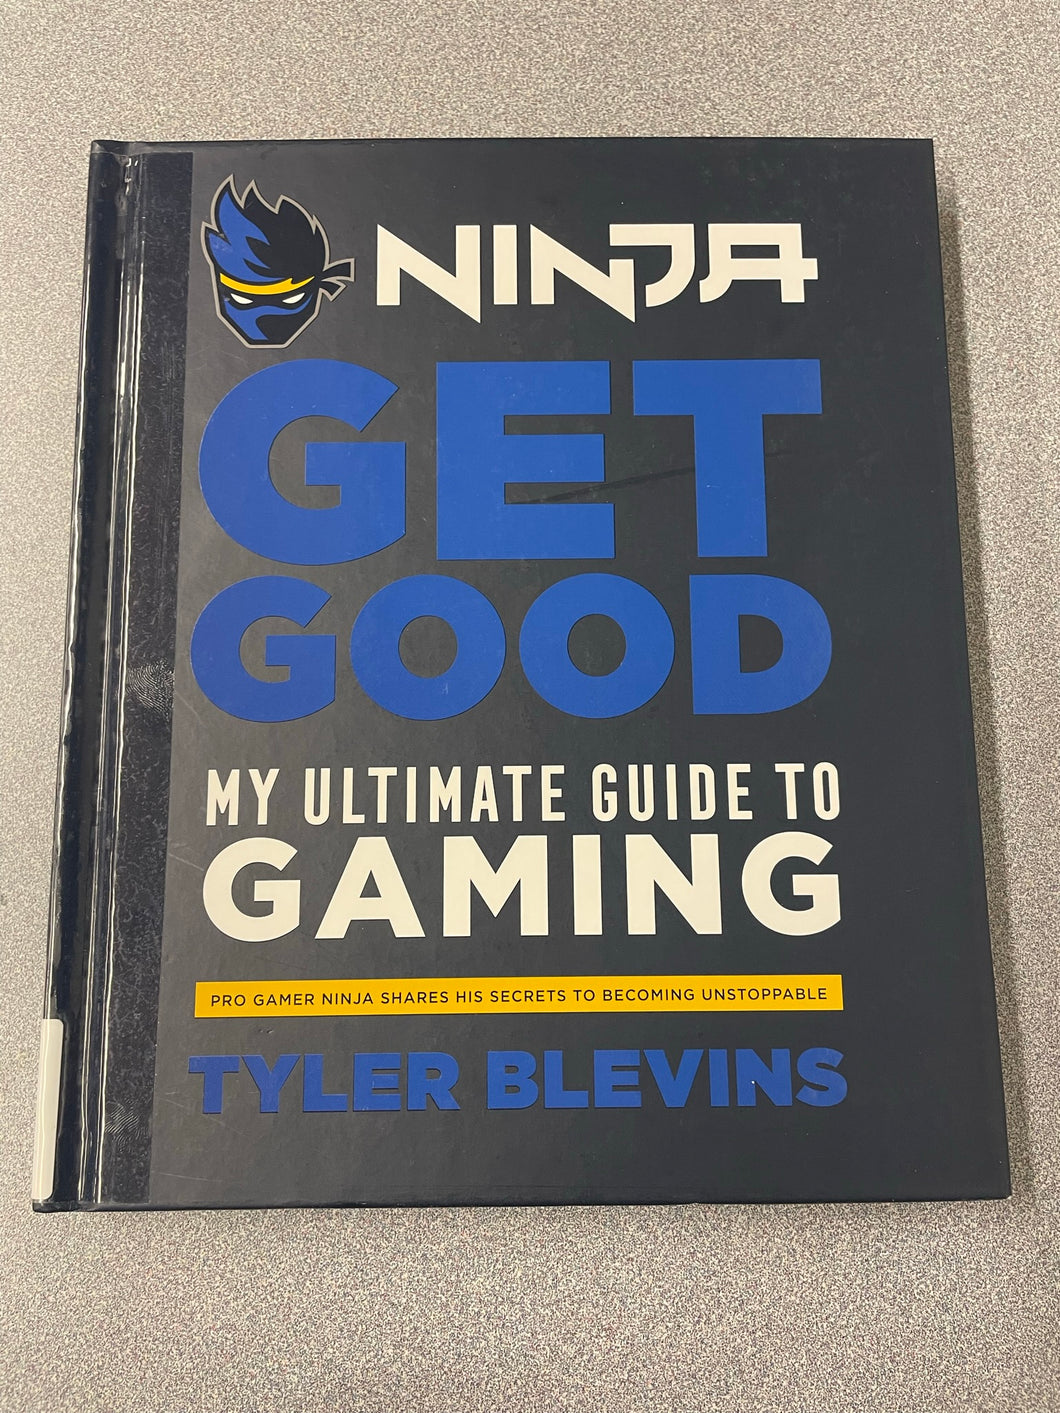 CG Ninja Get Good My Ultimate Guide to Gaming: Pro Gamer Ninja Shares His Secrets to Becoming Unstoppable, Blevins, Tyler [2019] N 1/23